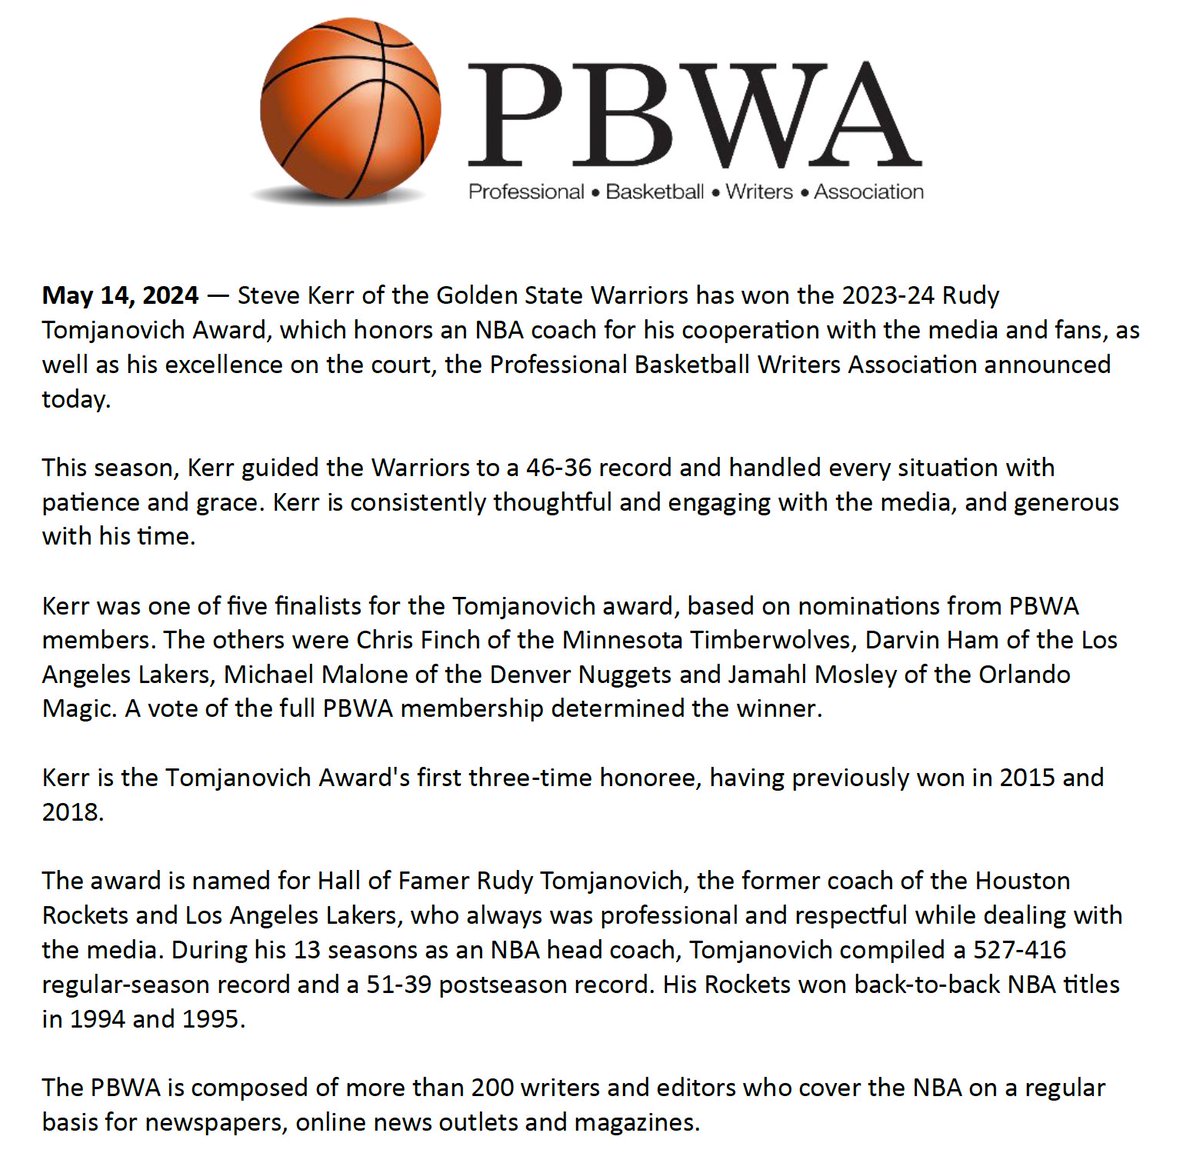 The PBWA is pleased to announce that Warriors coach Steve Kerr has won the Rudy Tomjanovich Award for the 2023-24 season. Details at probasketballwriters.org